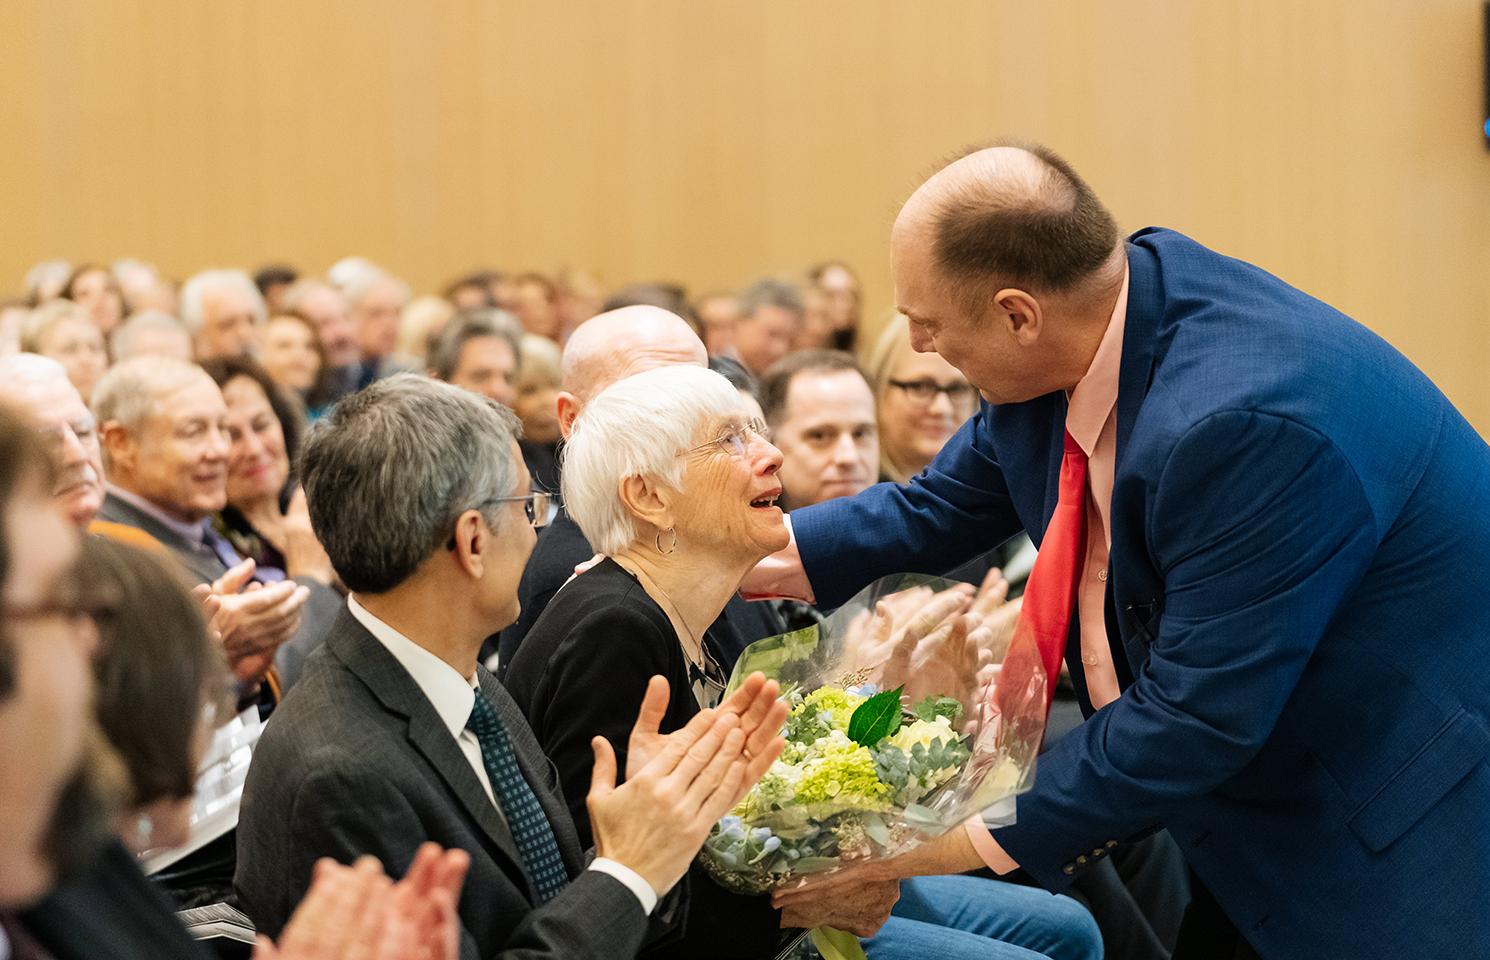 A man presents a bouquet of flowers to a smiling woman.